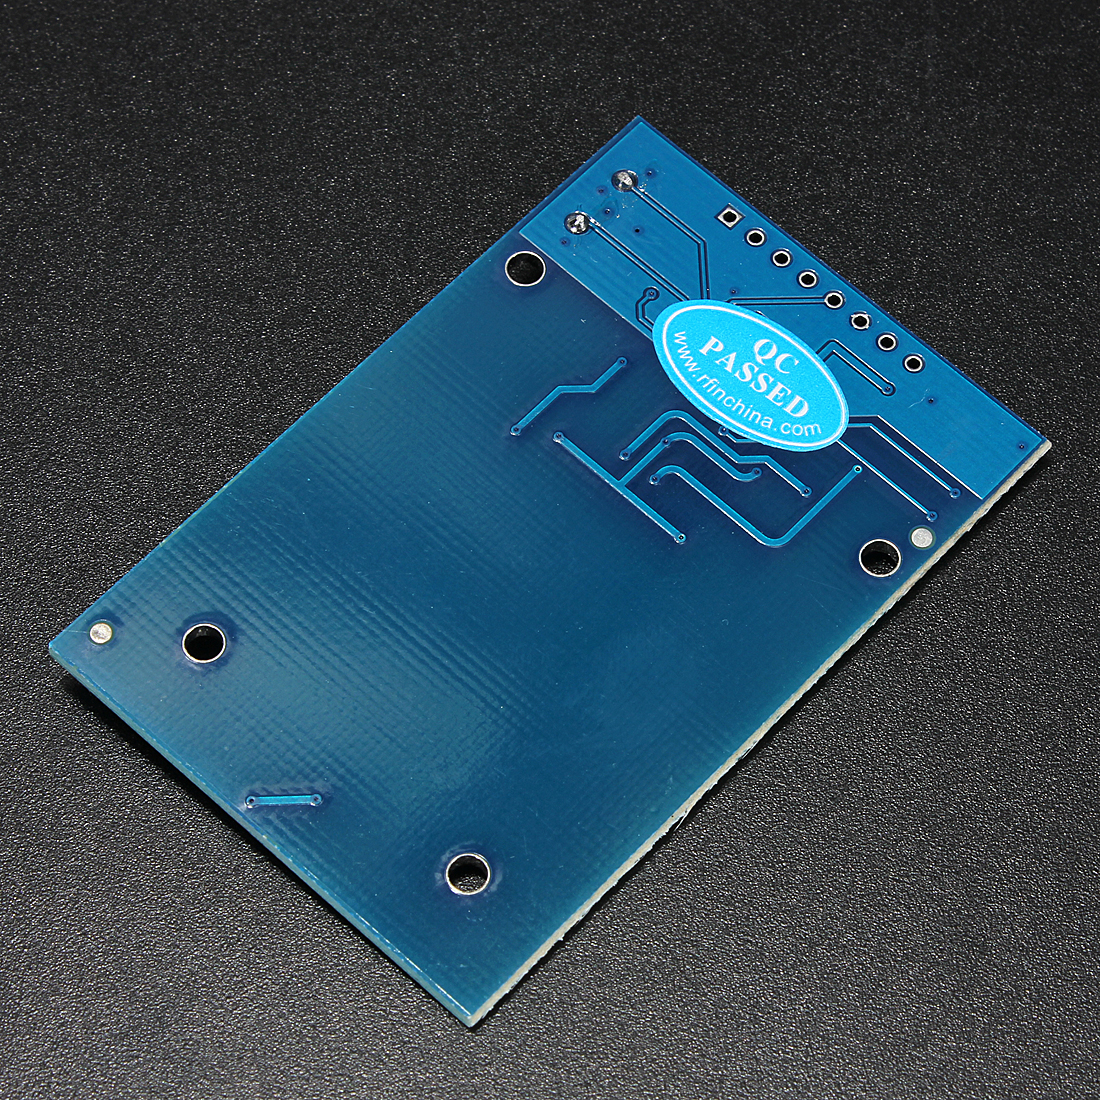 33V-RC522-Chip-IC-Card-Induction-Module-RFID-Reader-1356MHz-10Mbits-81067-4